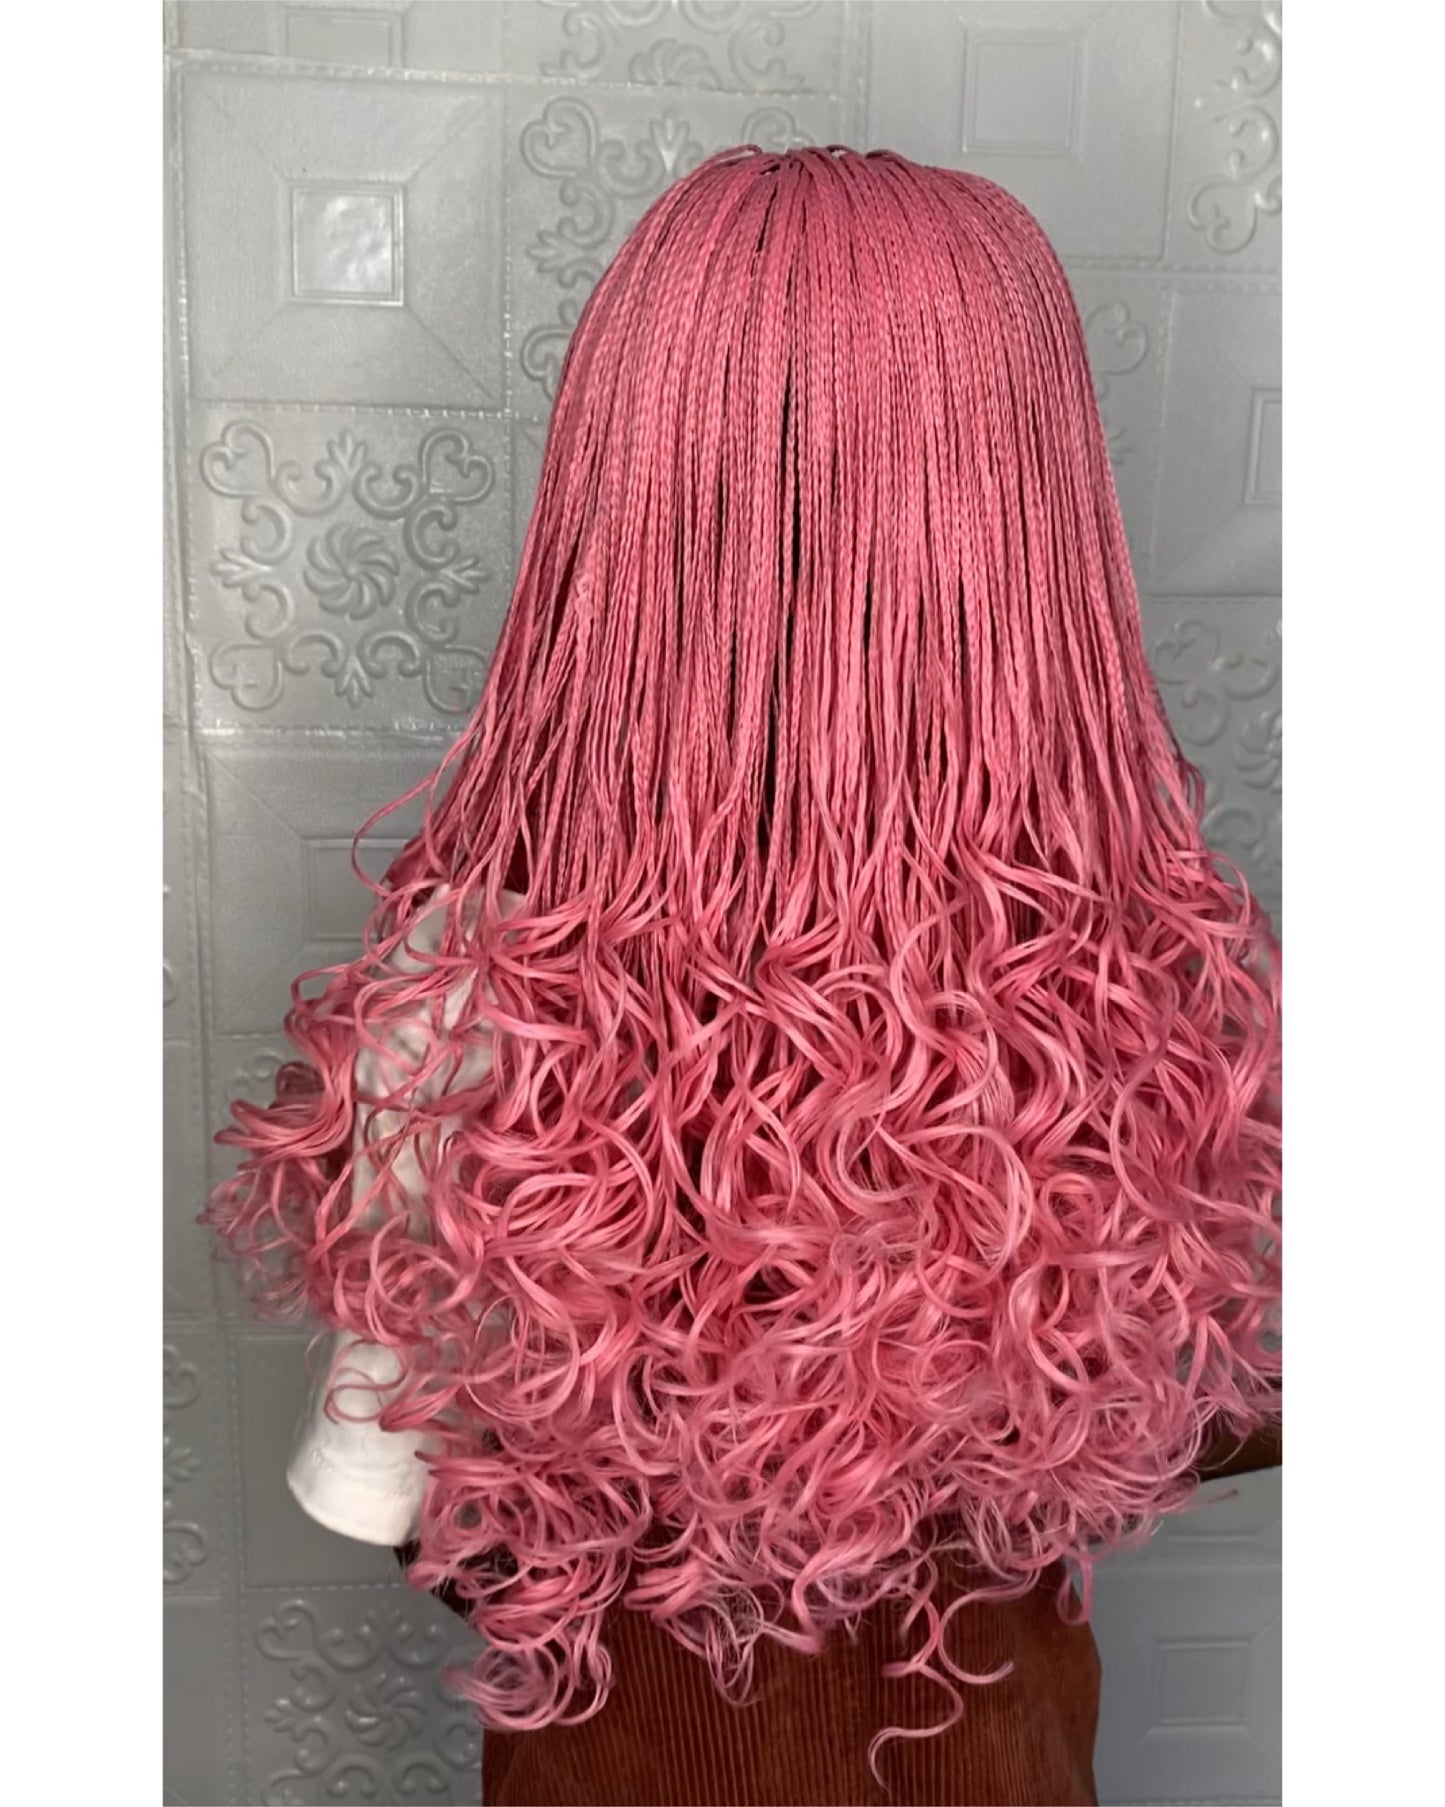 Baby pink Lexia curly kiddies wig